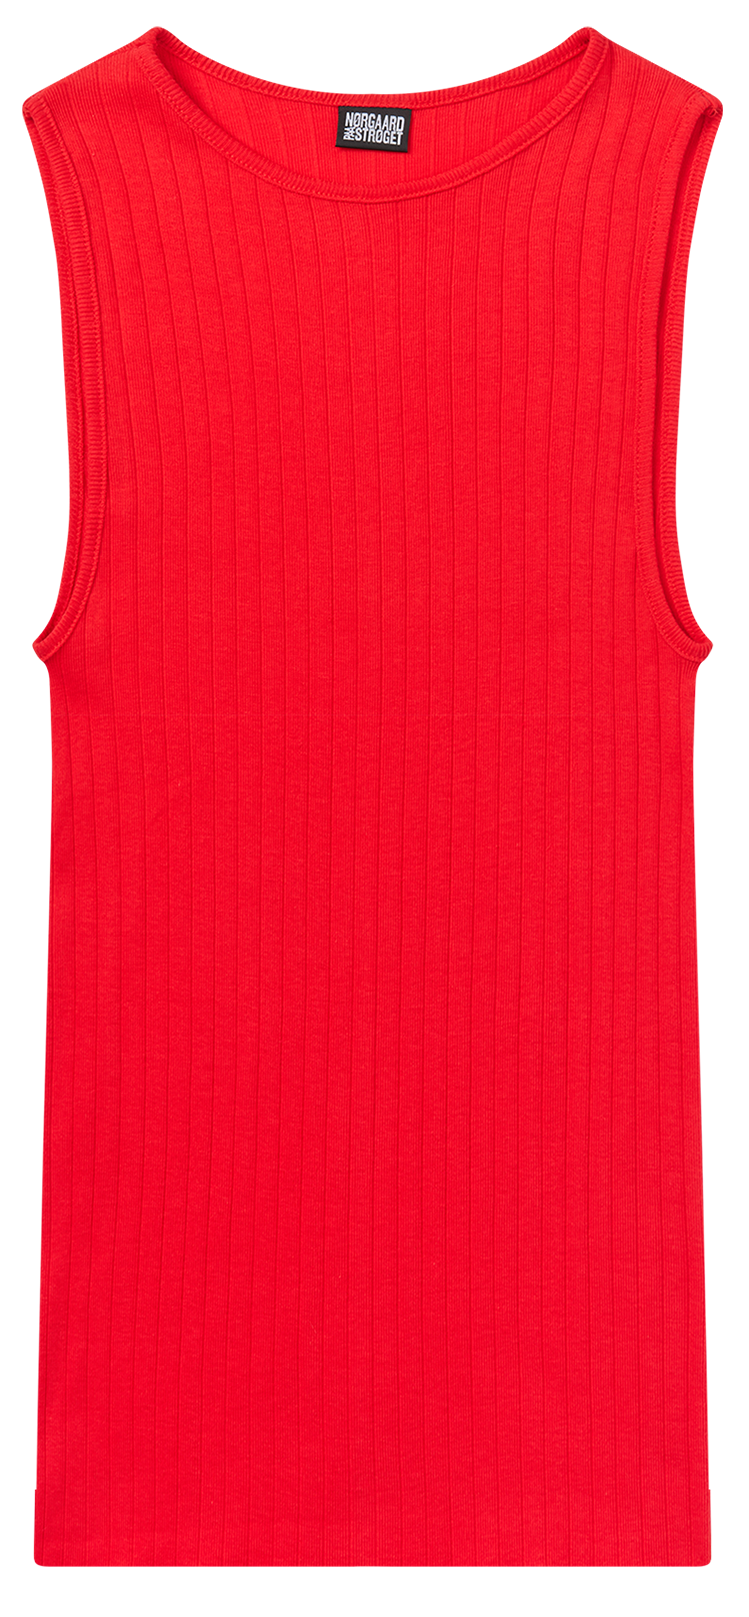 NPS Tank Top Solid Color, Red